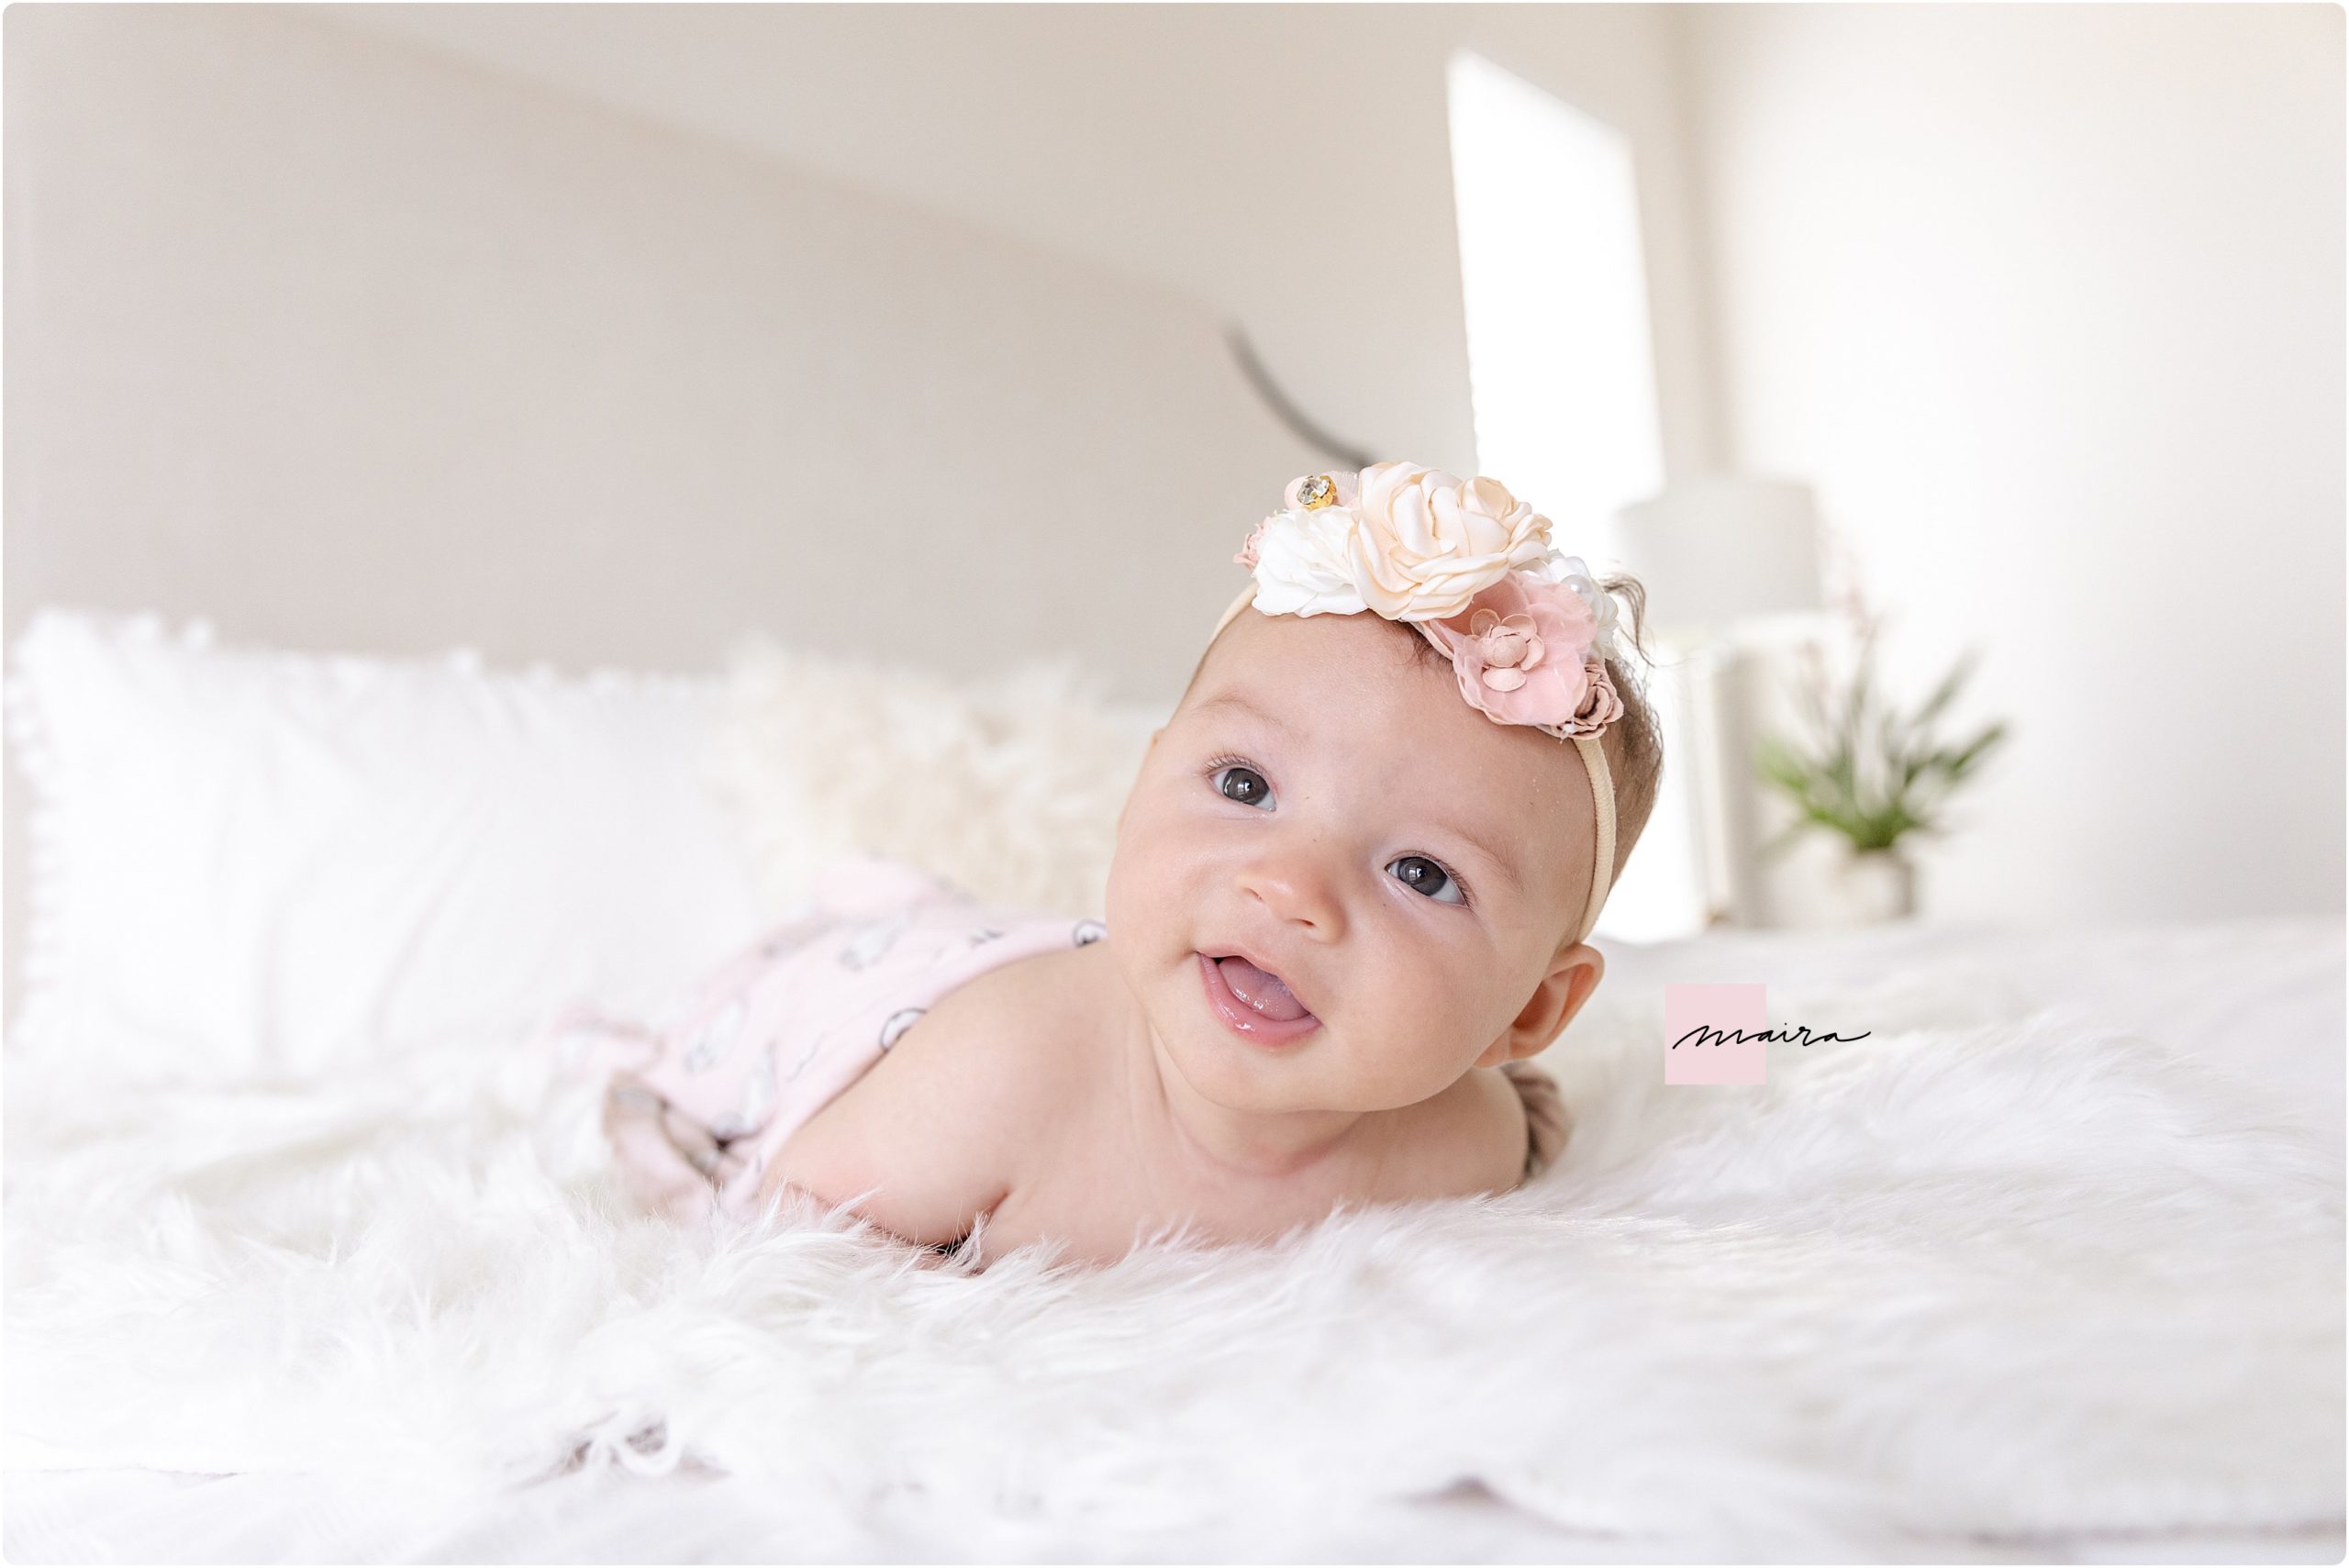 Lifestyle Family Newborn Session, Texas, Travel photography, baby photos, Home session, Mom and baby, Dad and baby, Big sister and little sister photos, nursery photos, mom, dad, family